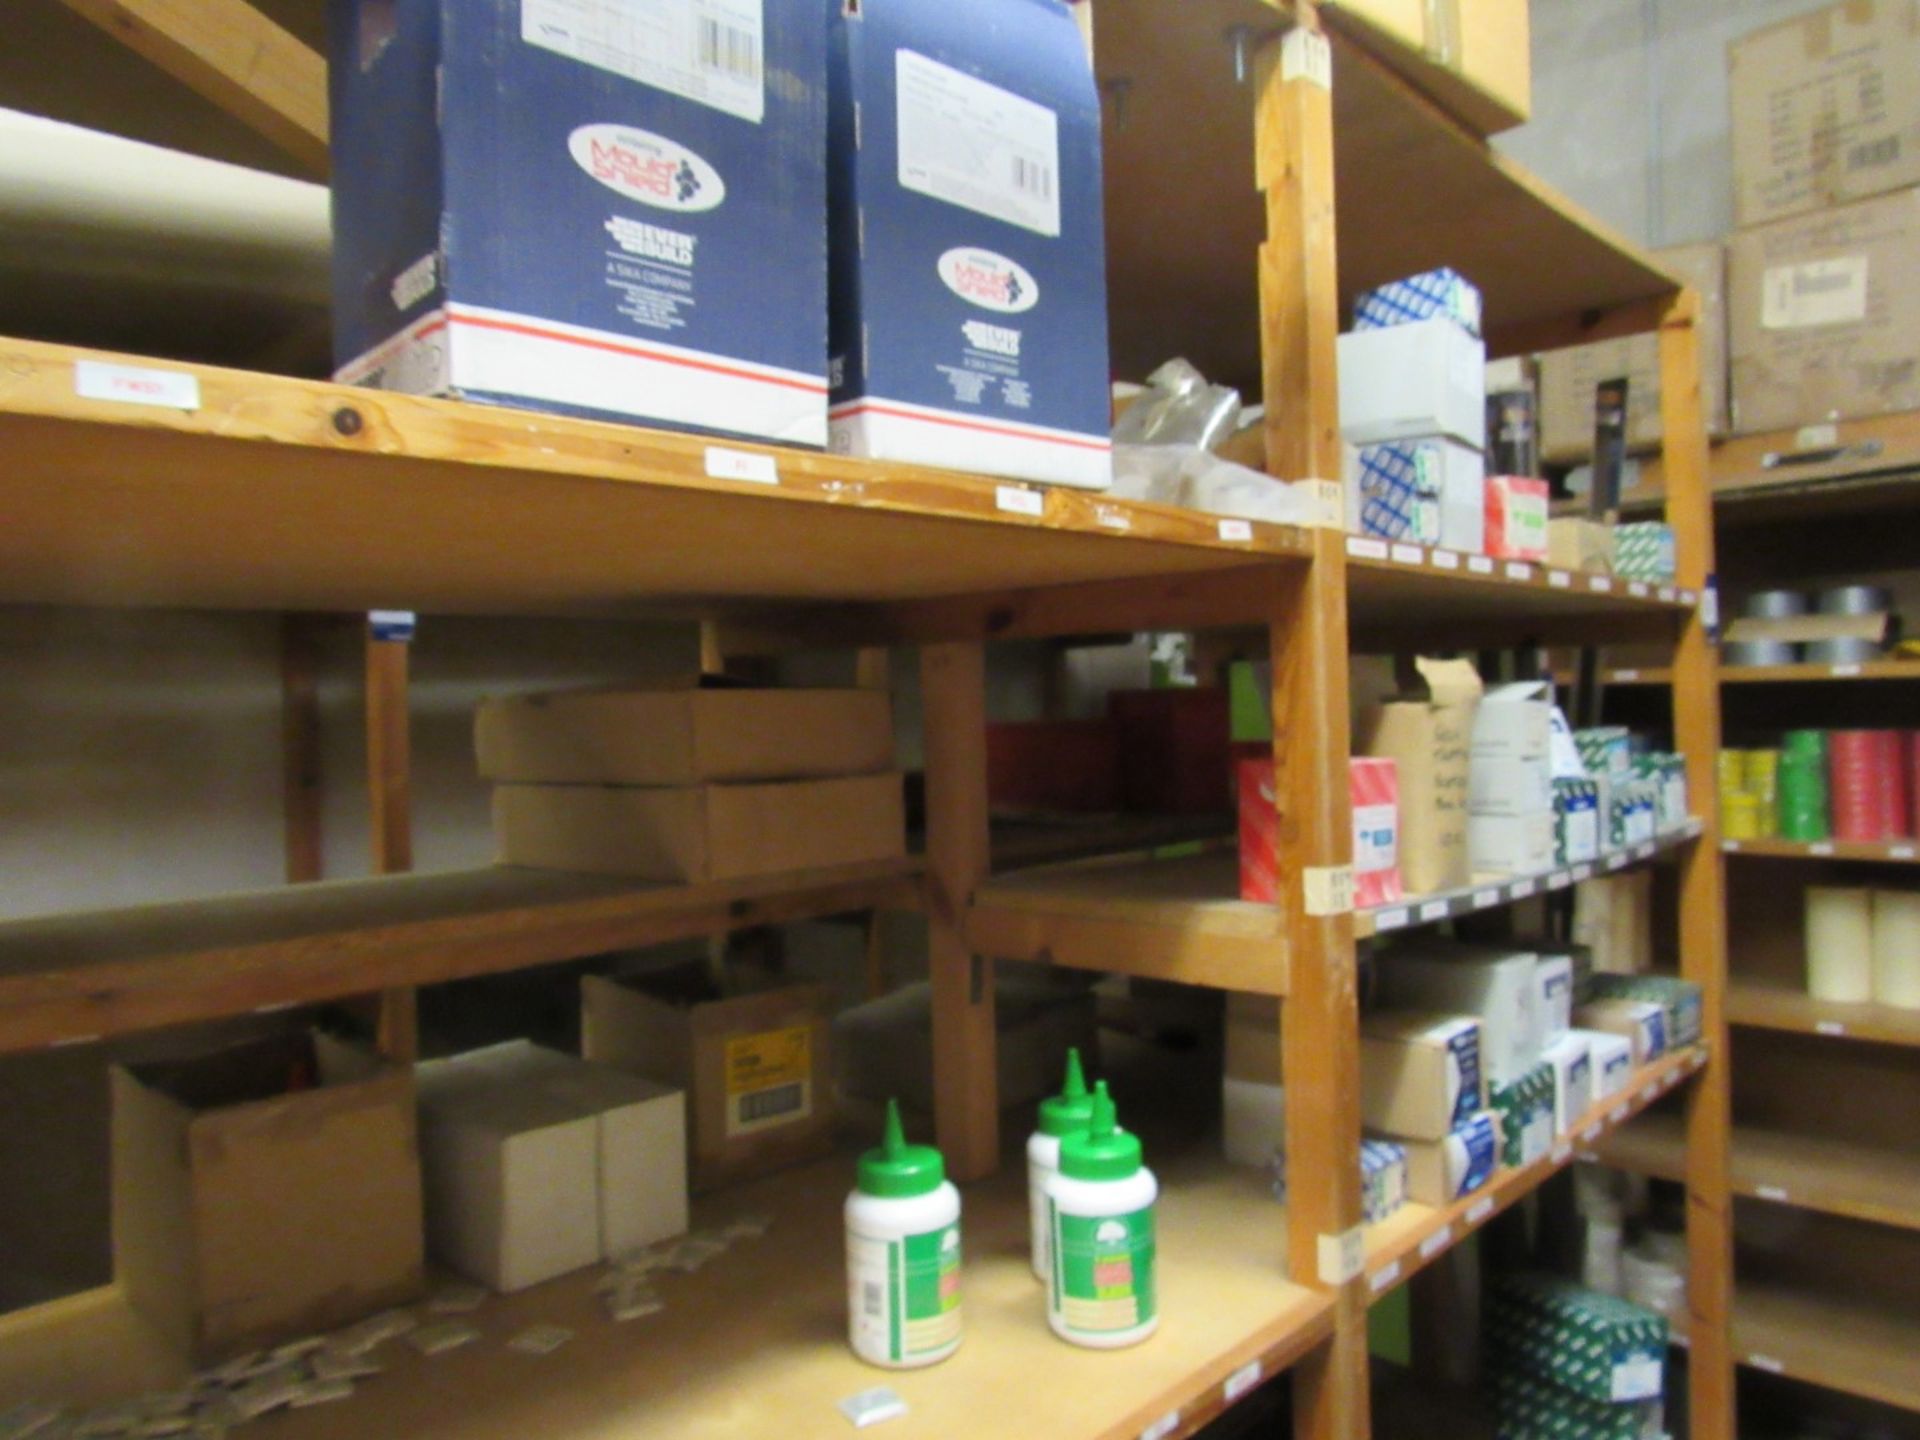 Contents to 10 Bay Wooden Shelving Unit including Sealants, Adhesive, Screws, Cutting Disks, - Image 3 of 4